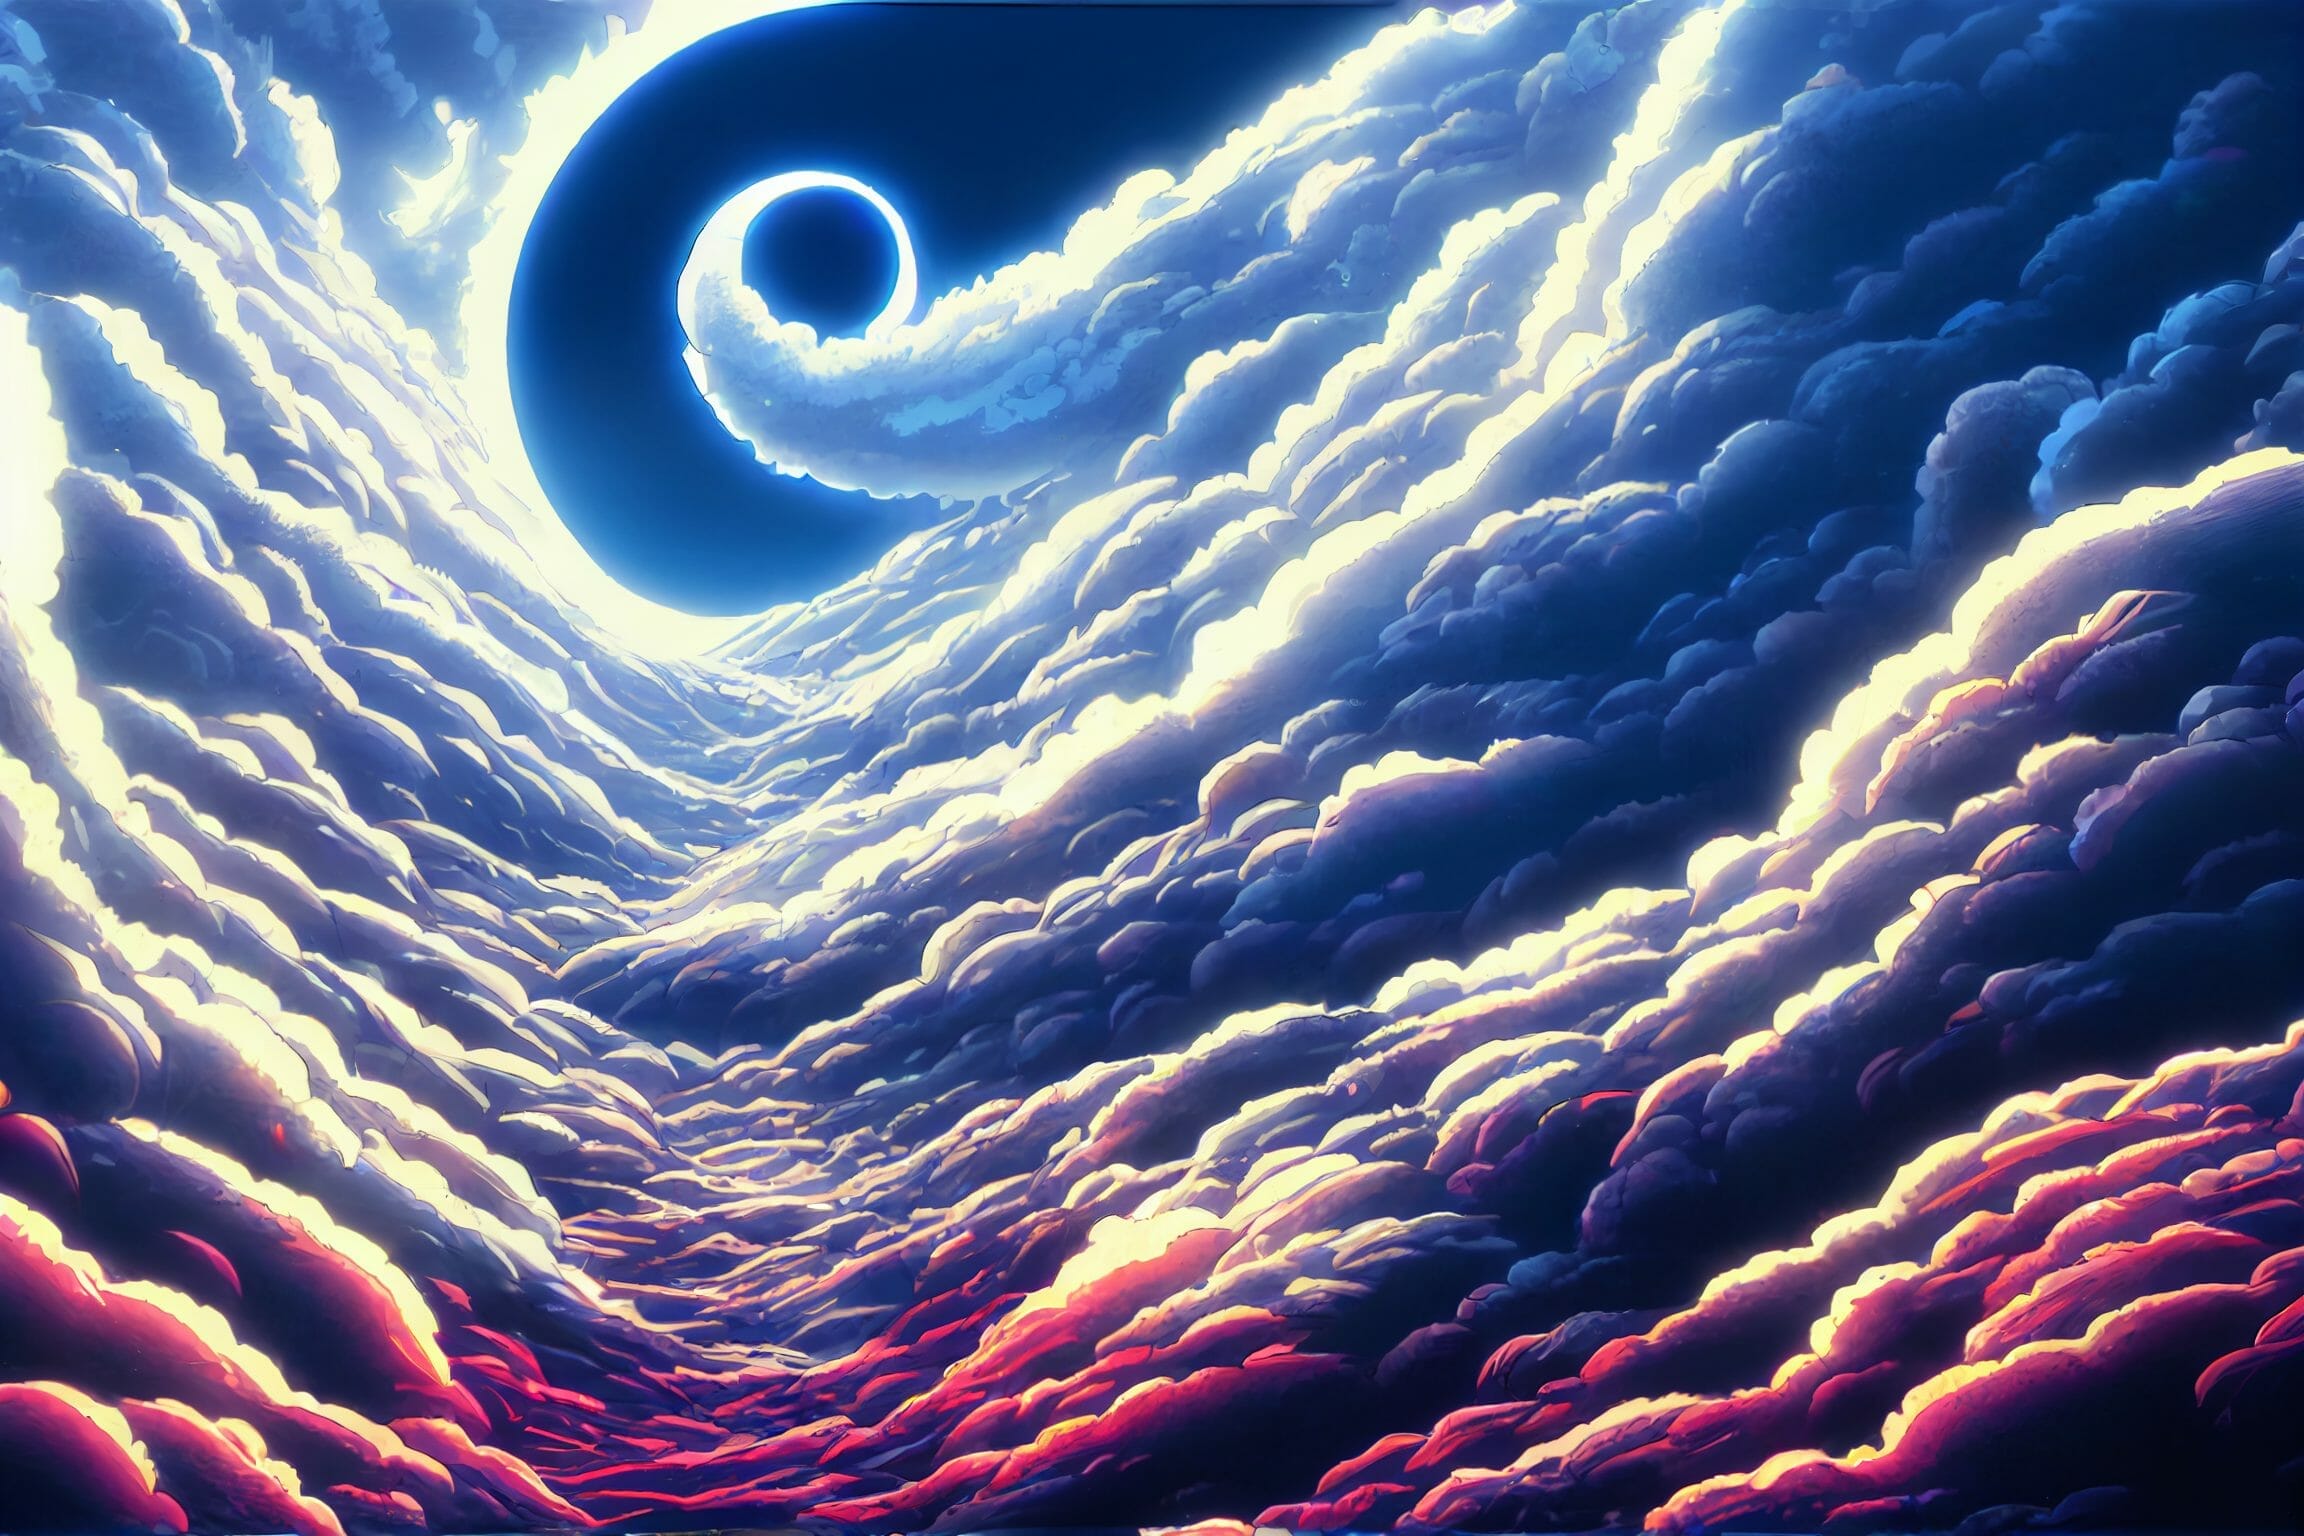 Swirling clouds